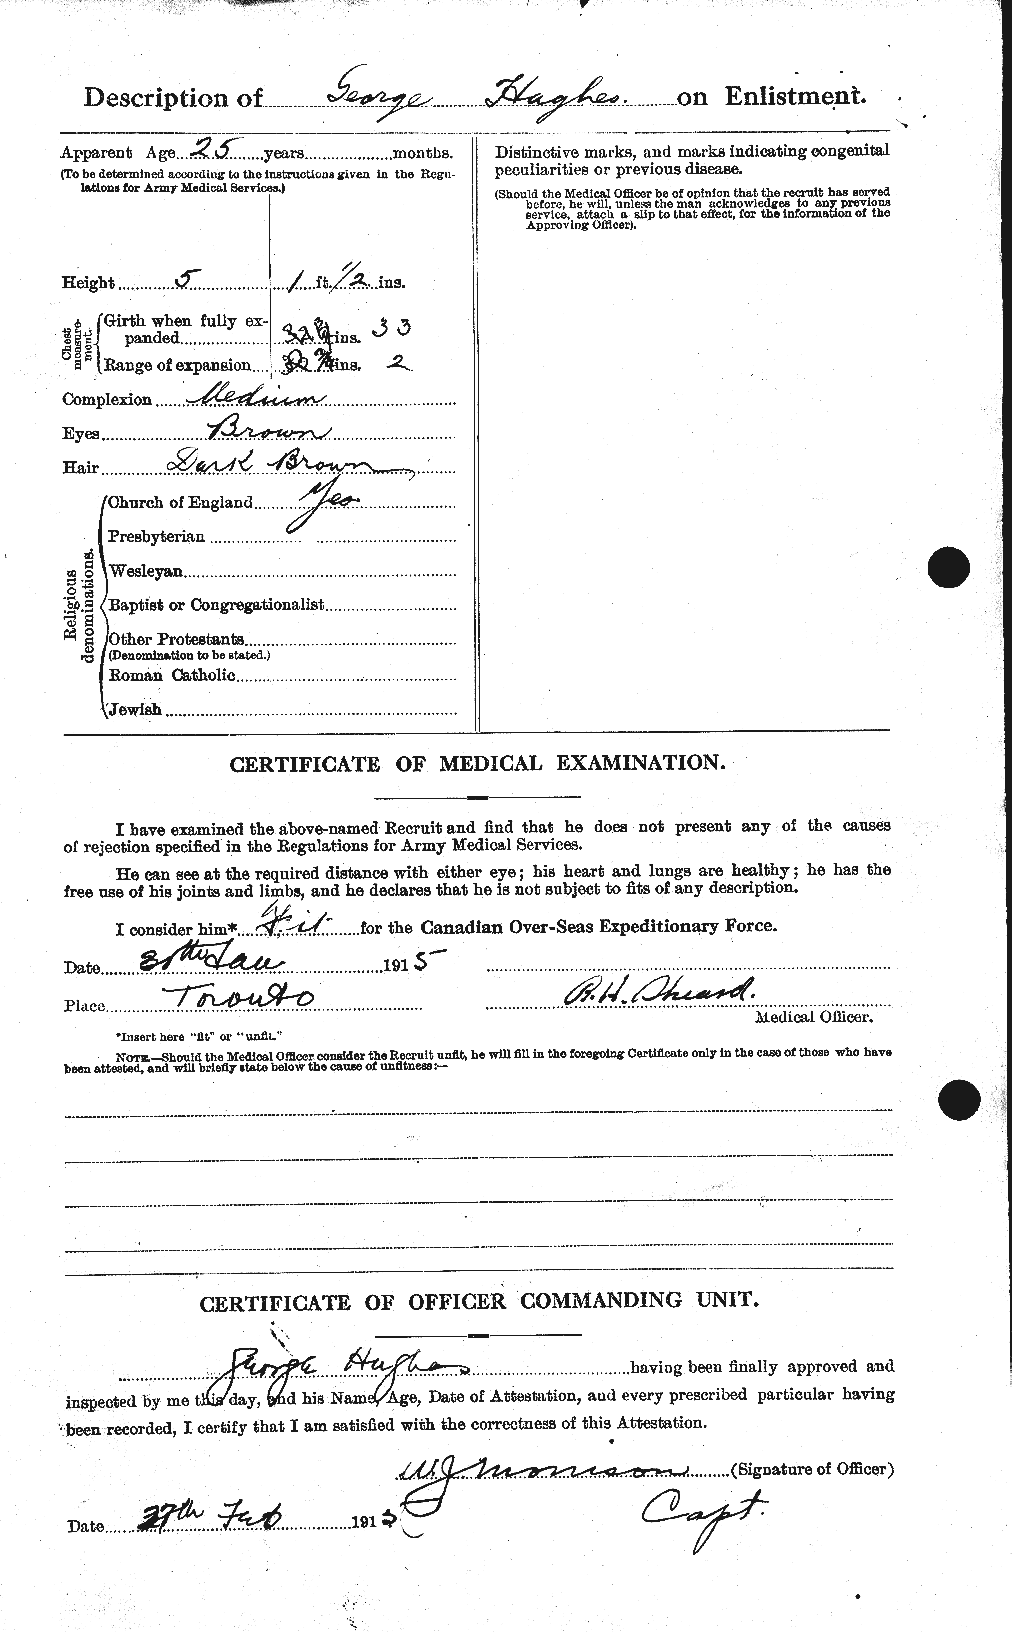 Personnel Records of the First World War - CEF 403816b